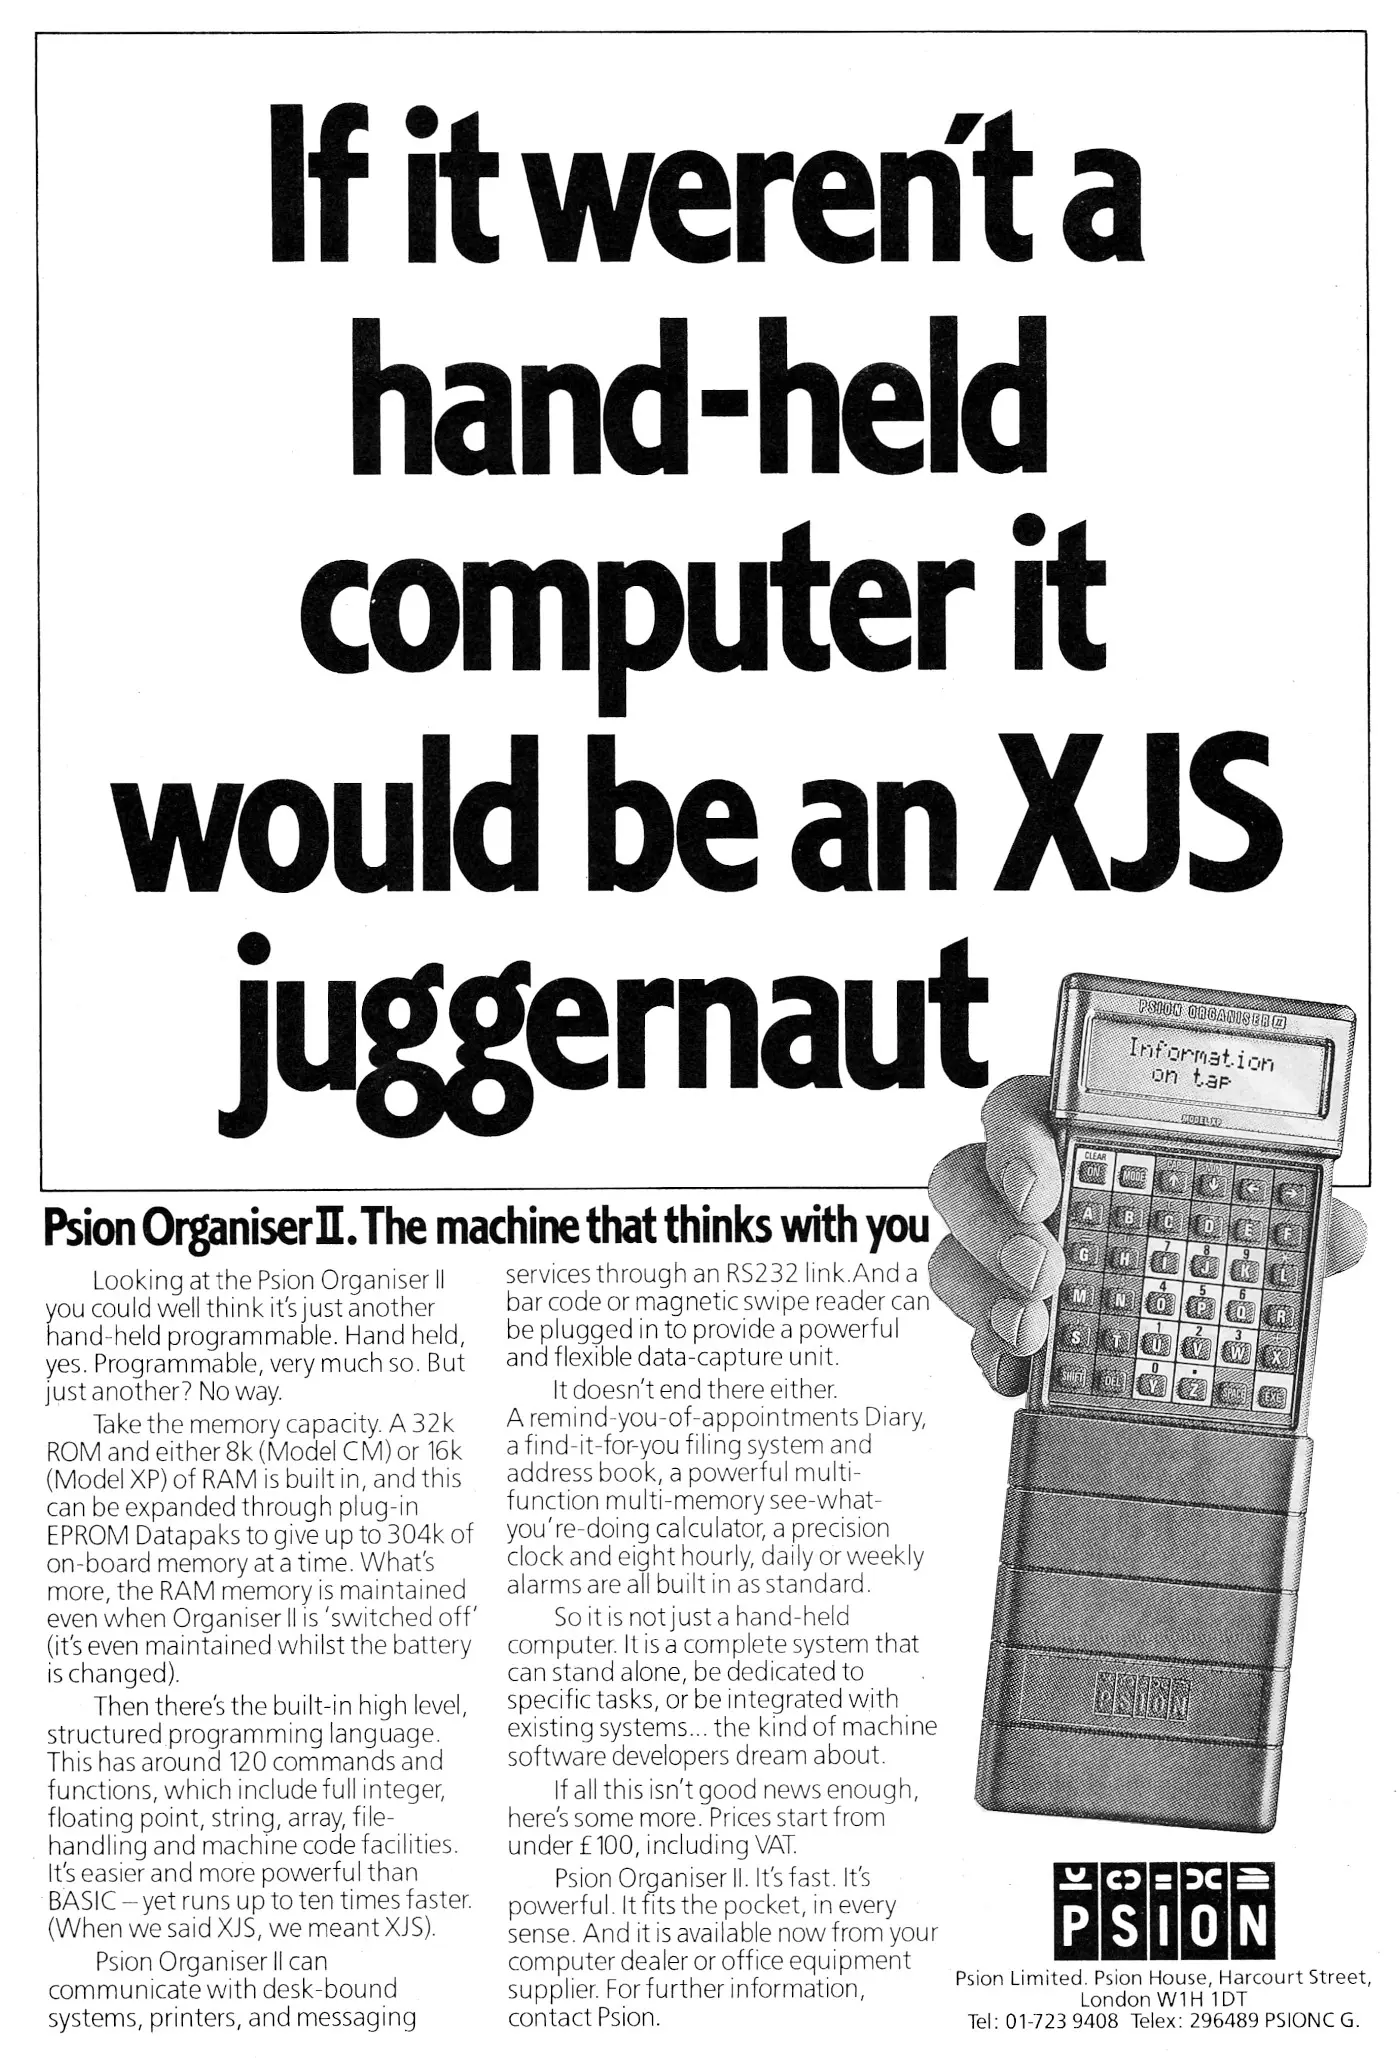 Psion Advert: If it weren't a handheld computer, it would be an XJS juggernaut, from Personal Computer World, January 1987